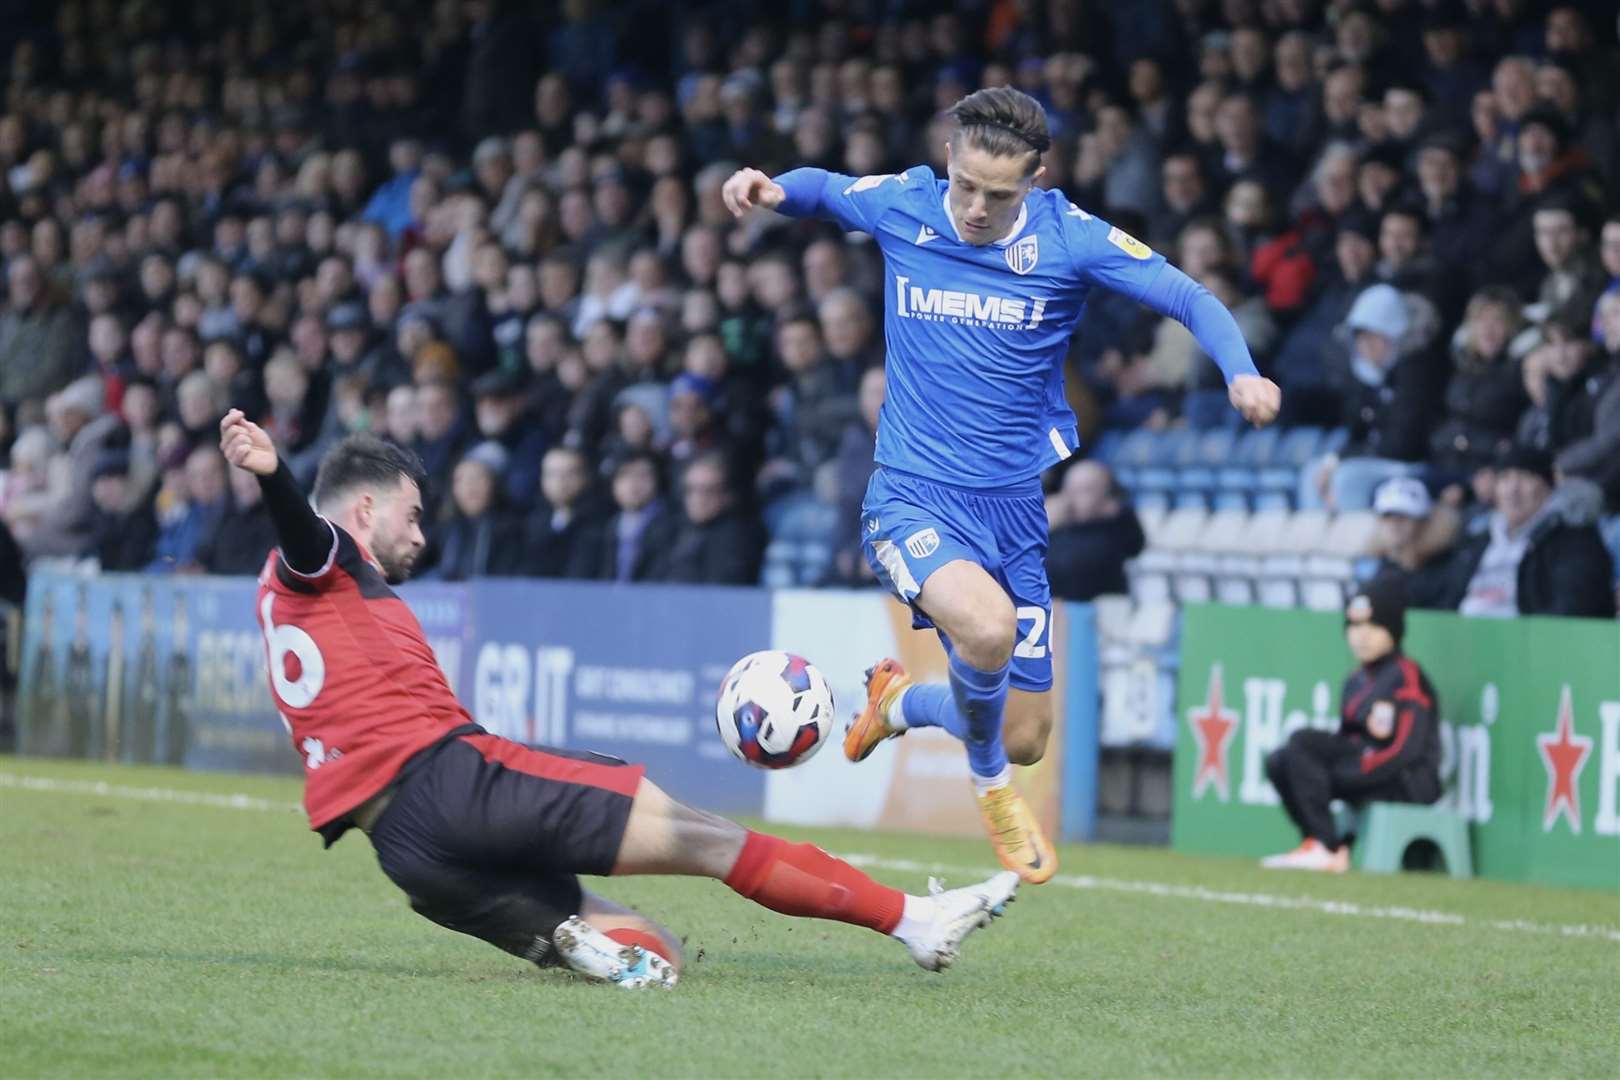 Newcomer Tom Nichols on the attack Gillingham against Hartlepool United (61848712)